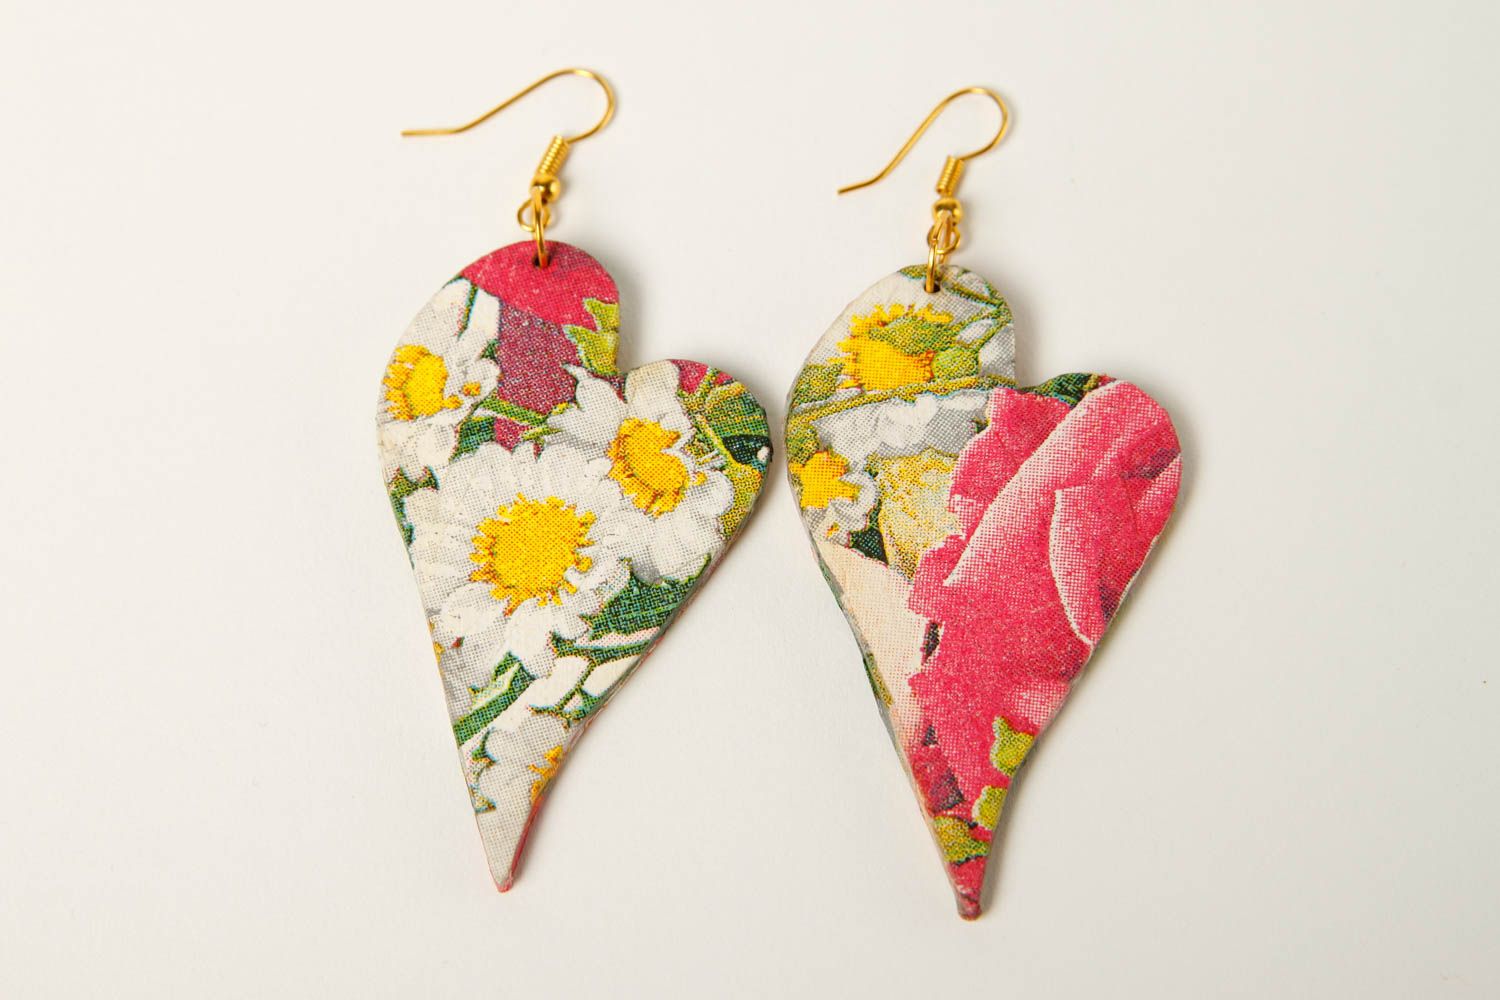 Fashionable handmade earrings wooden accessories perfect gift stylish jewelry photo 3